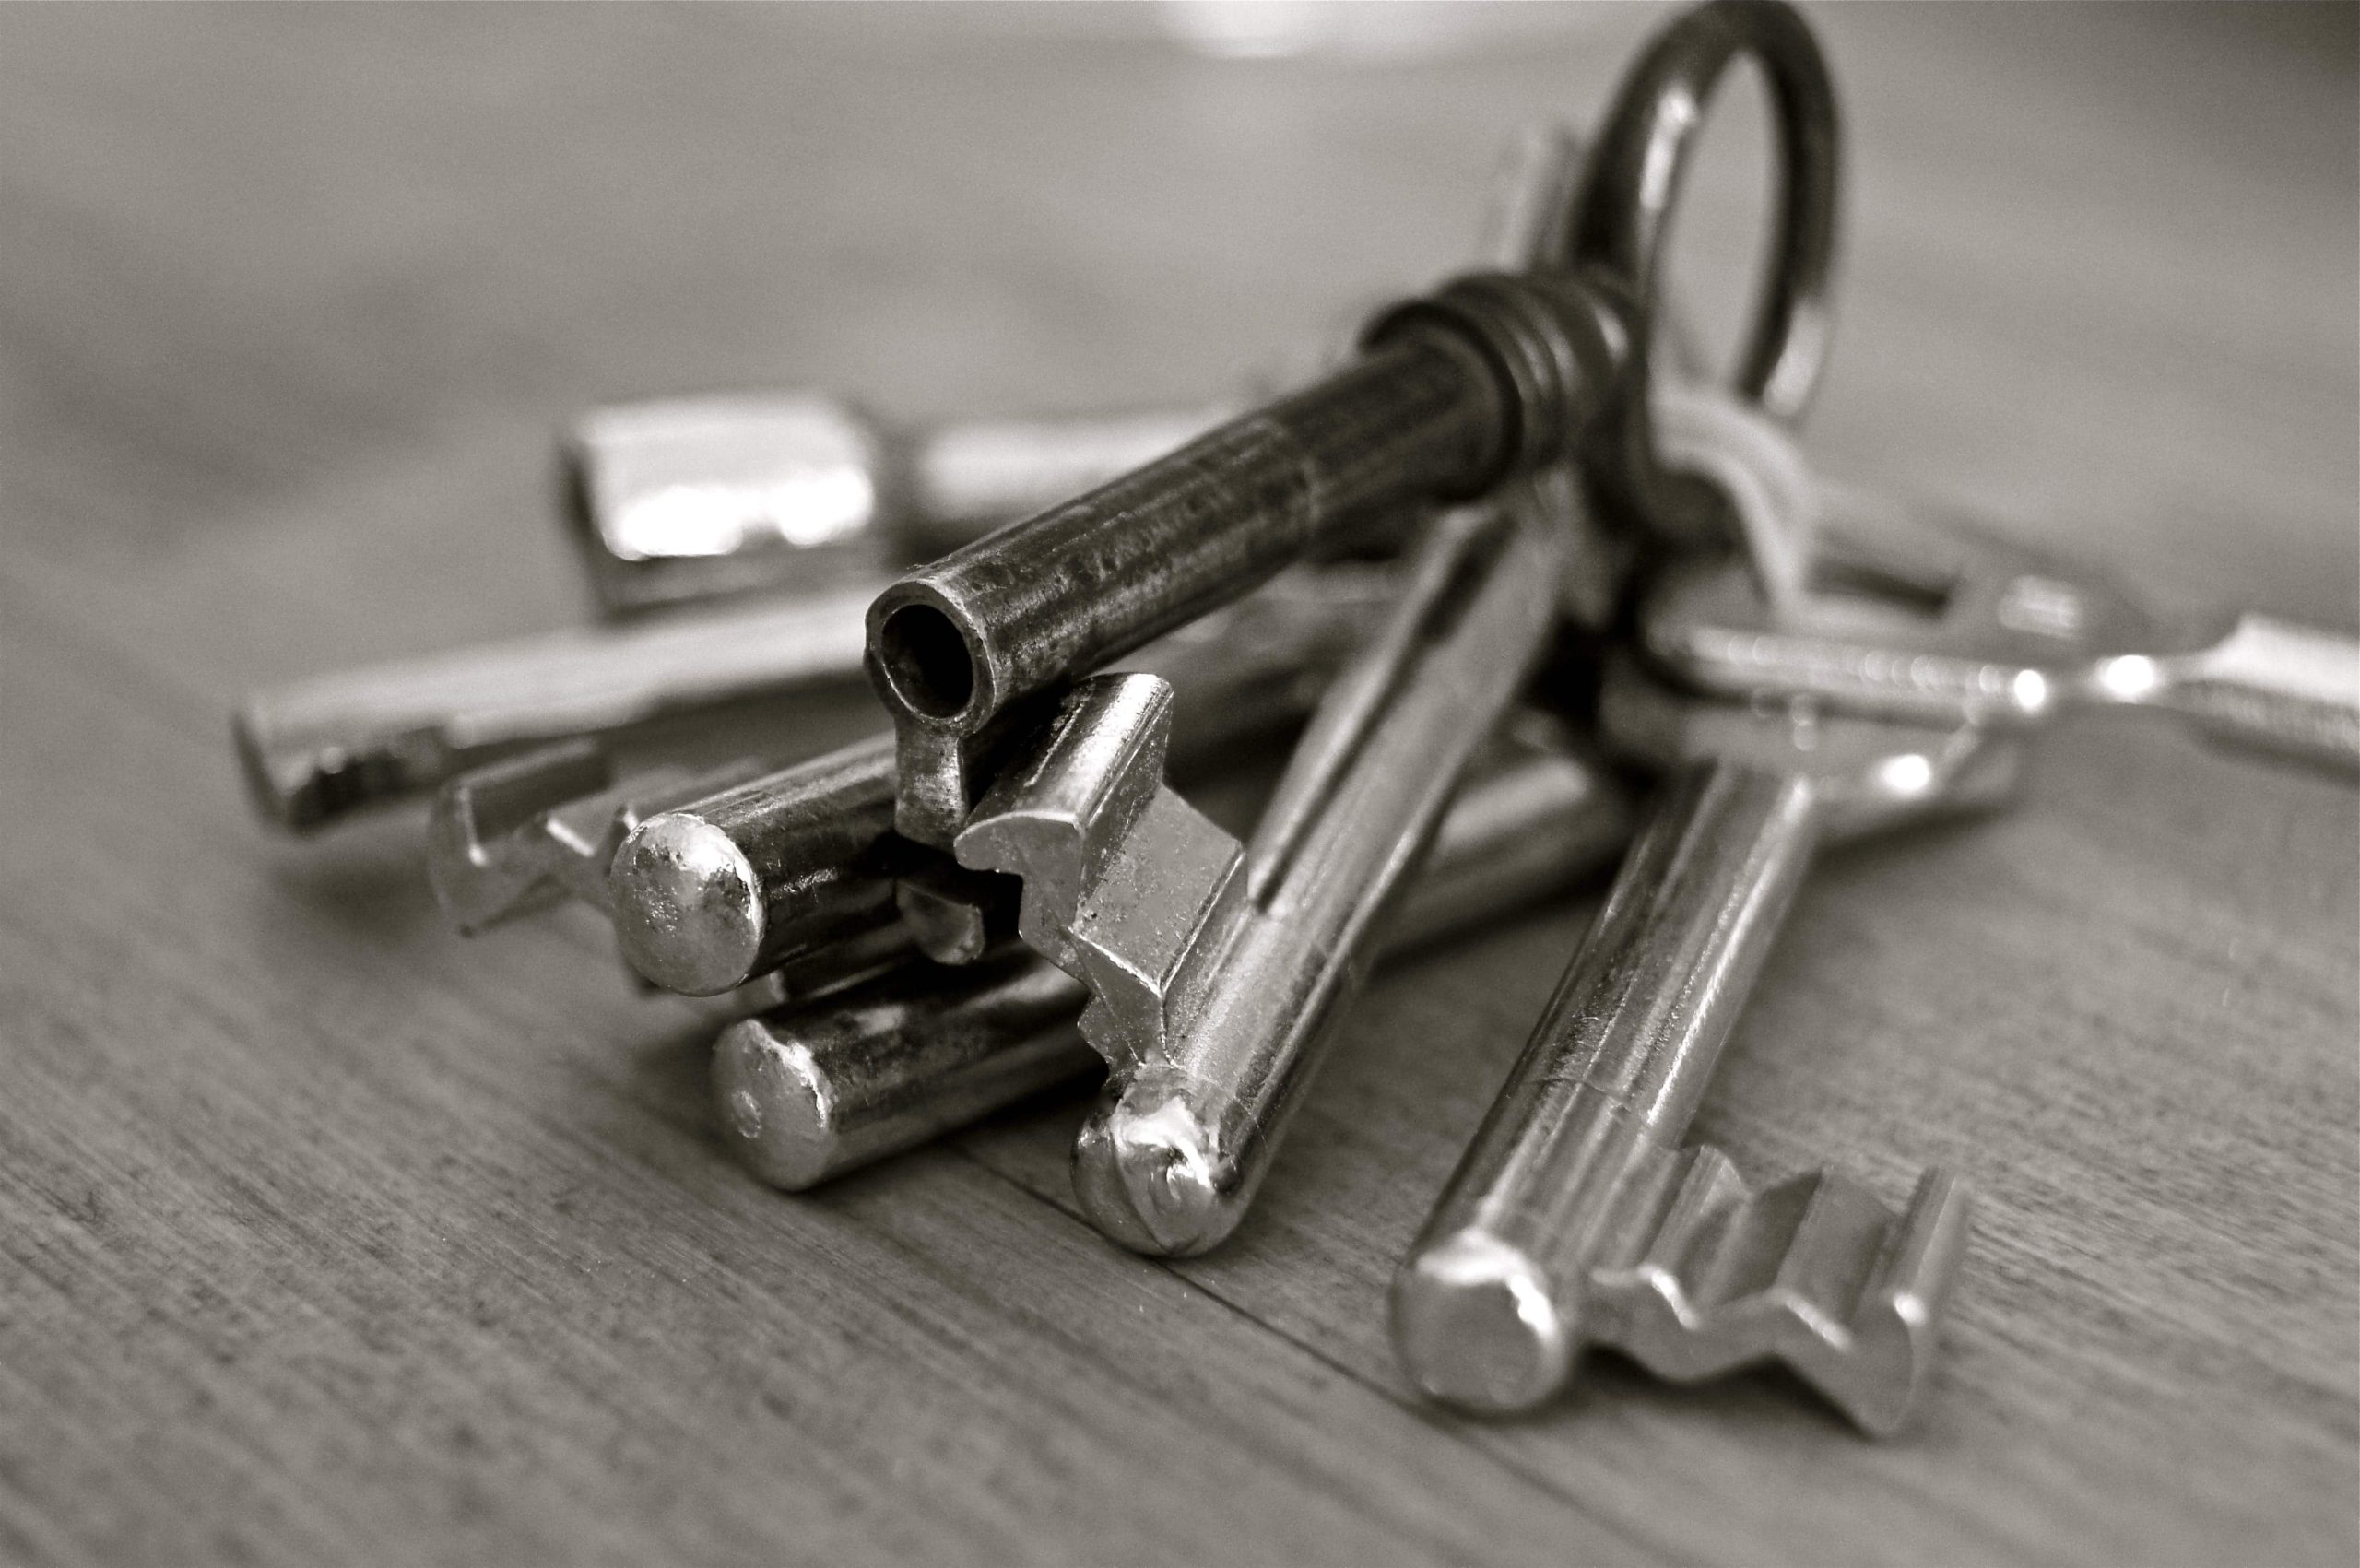 An image of a set of silver keys on a table in a house.